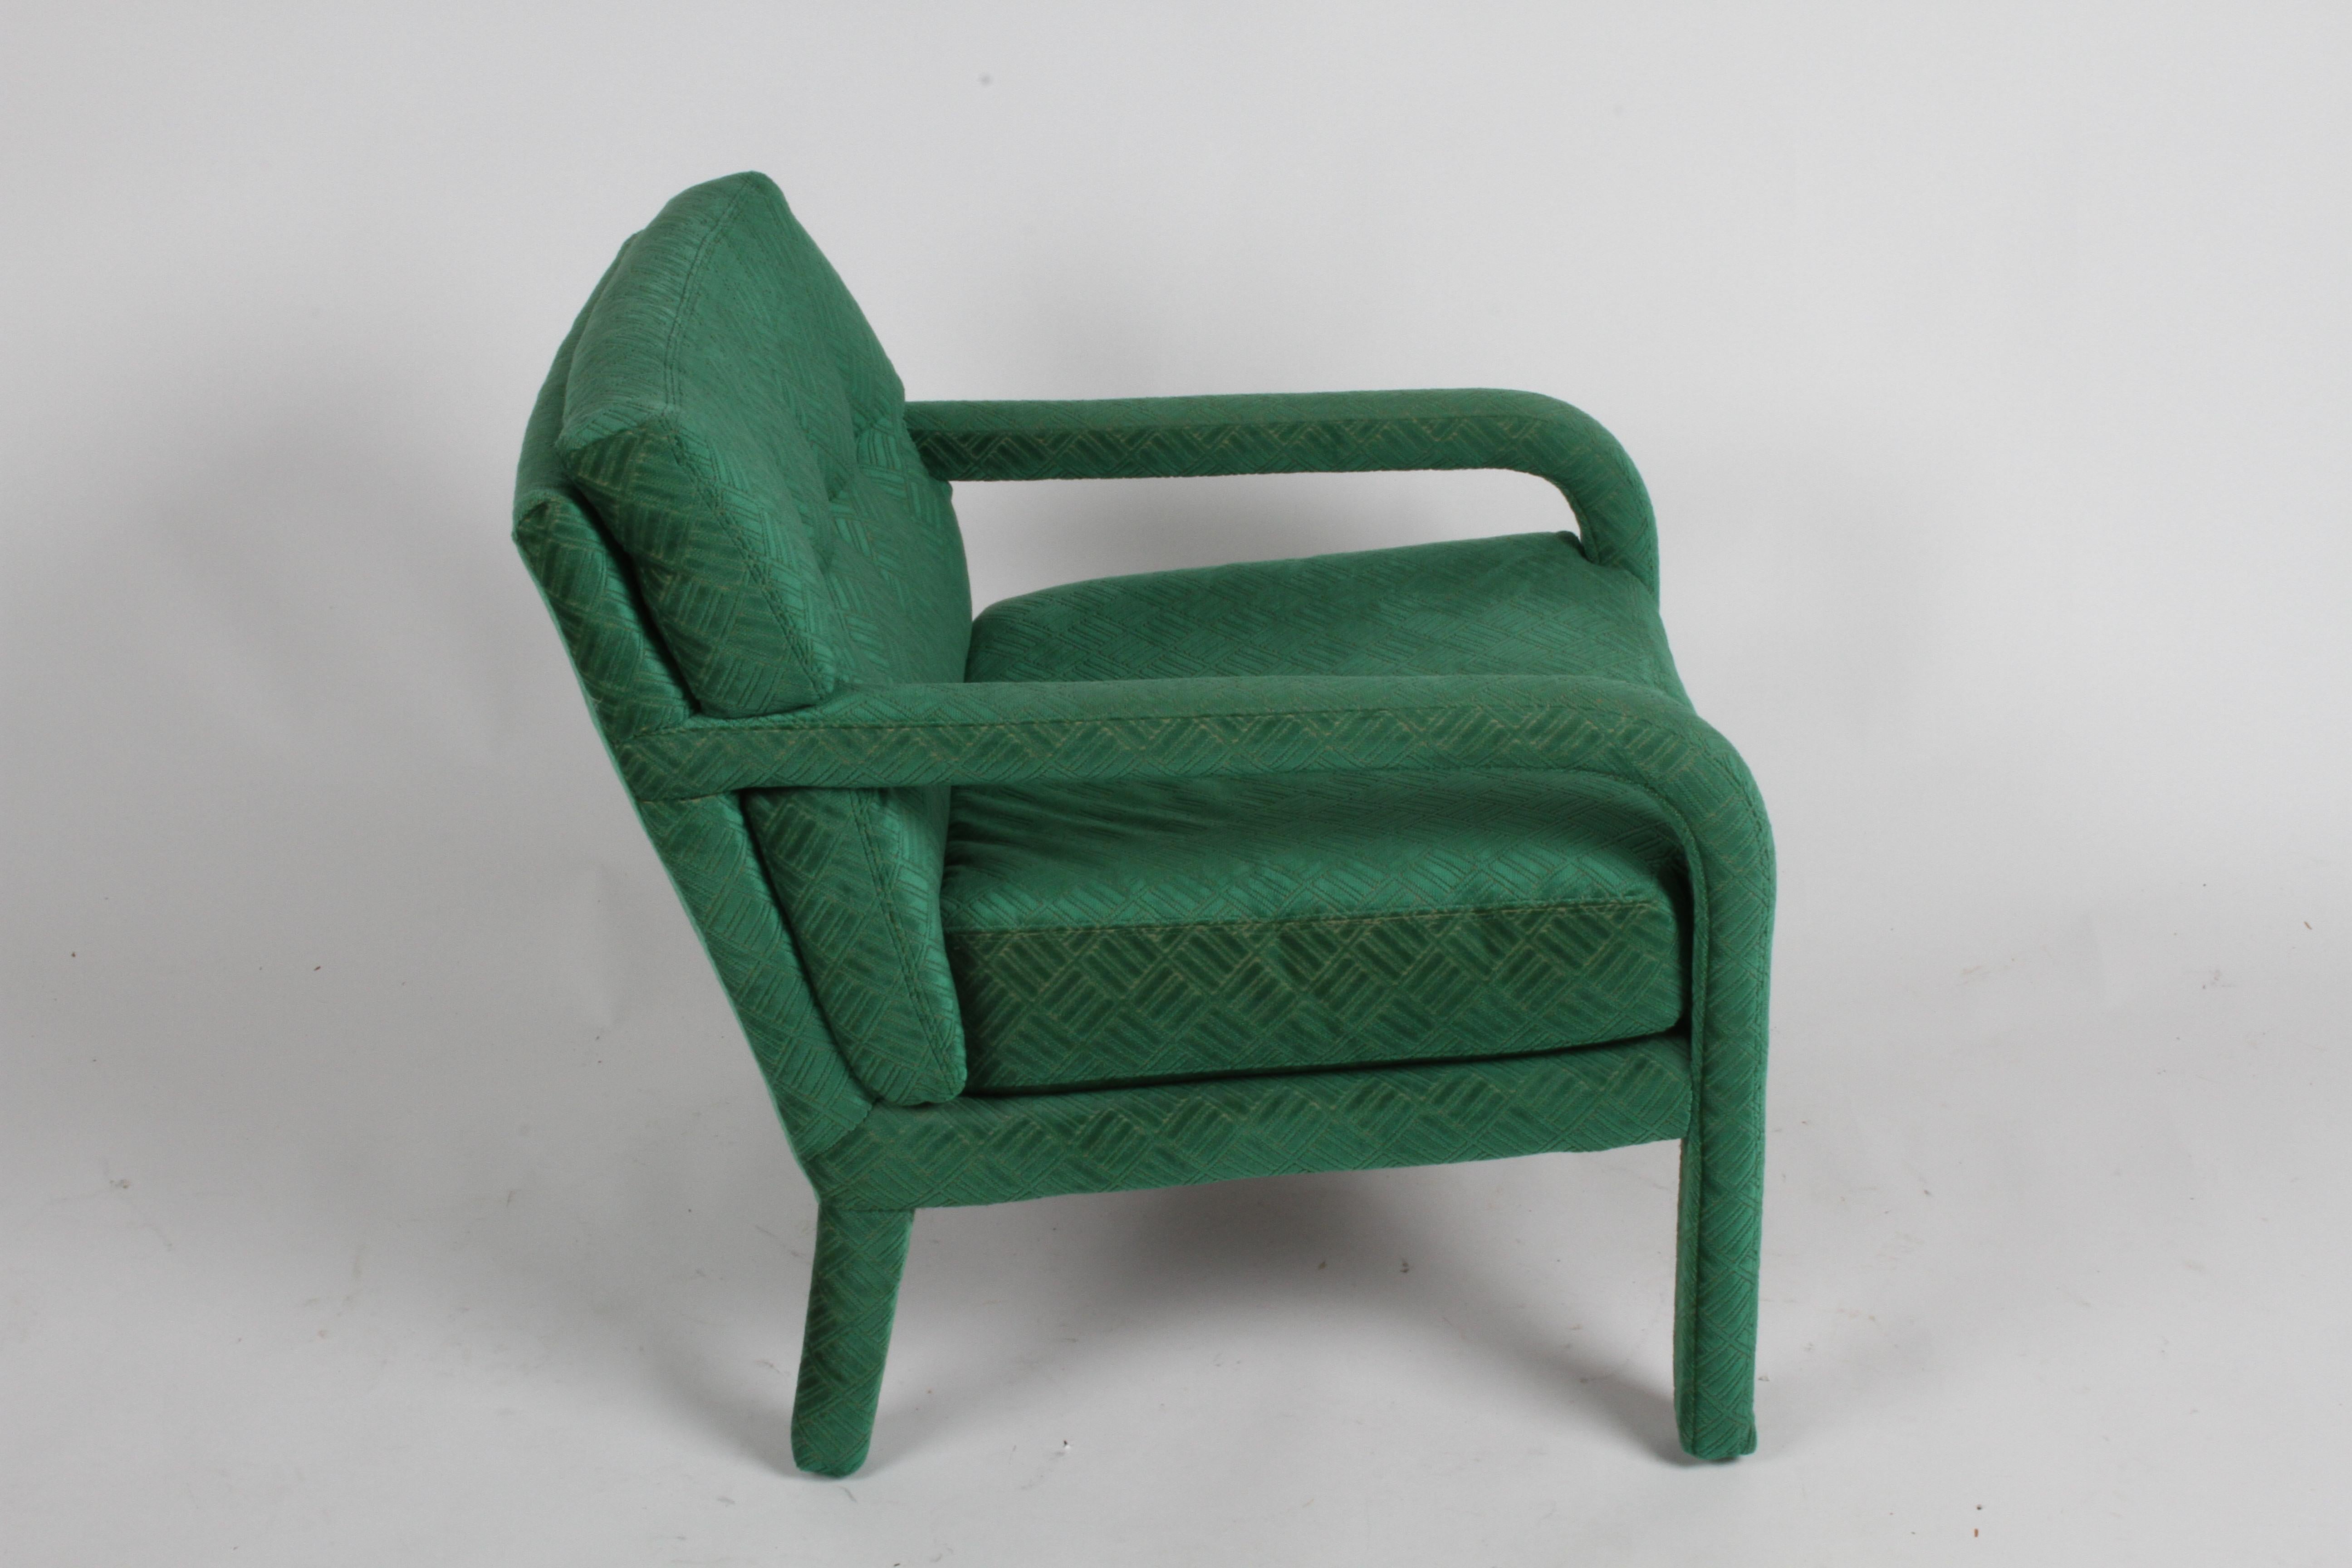 Late 20th Century Pair of 1970s Directional Lounge Chairs in a Textured Emerald Green Upholstery